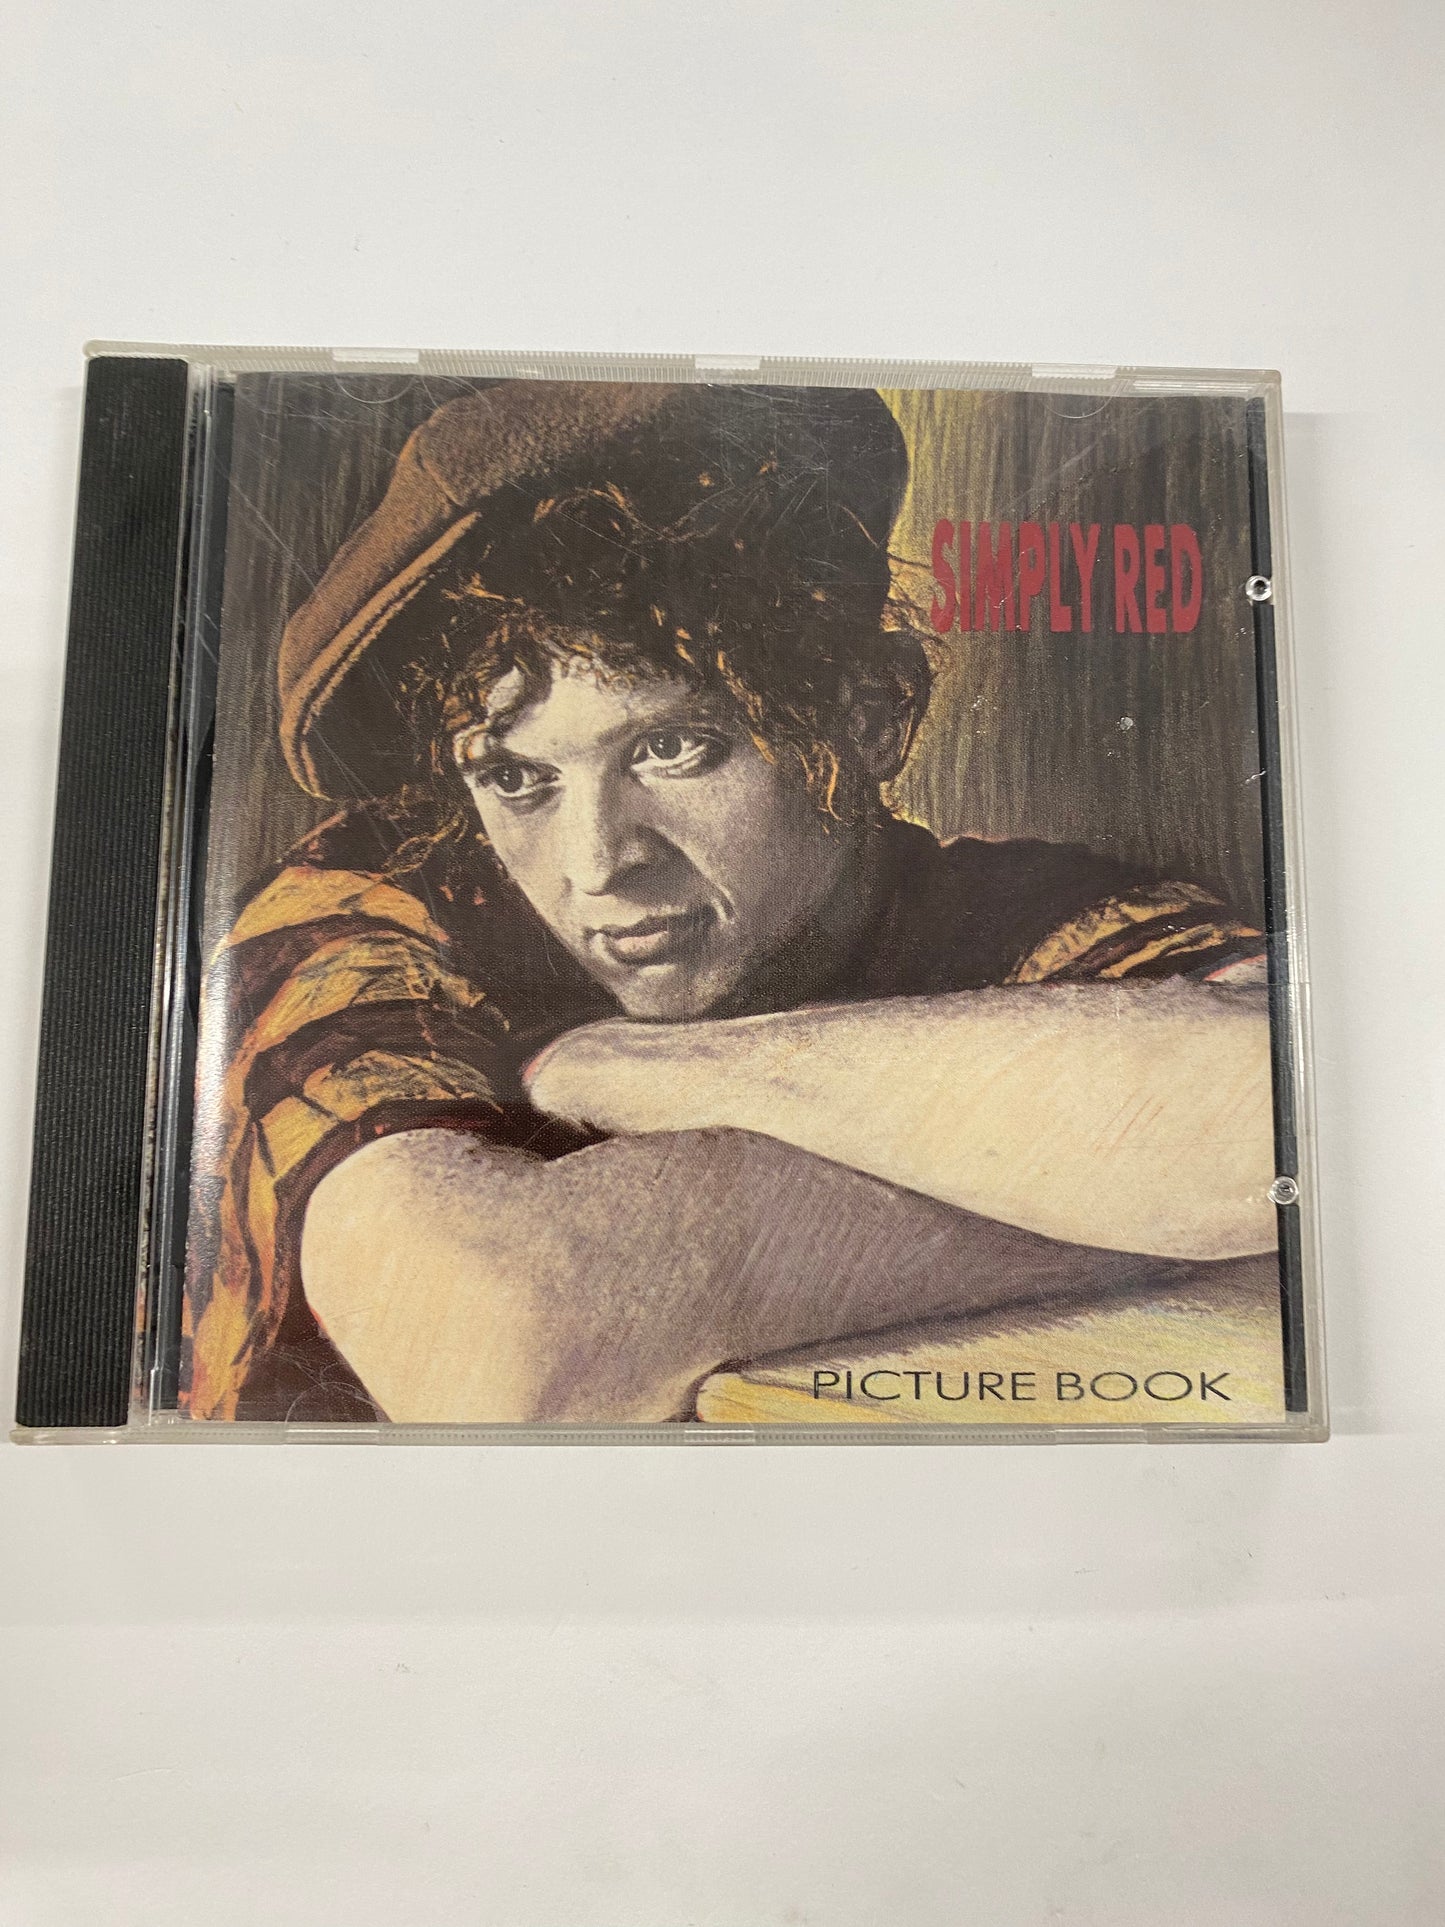 Simply Red 1120